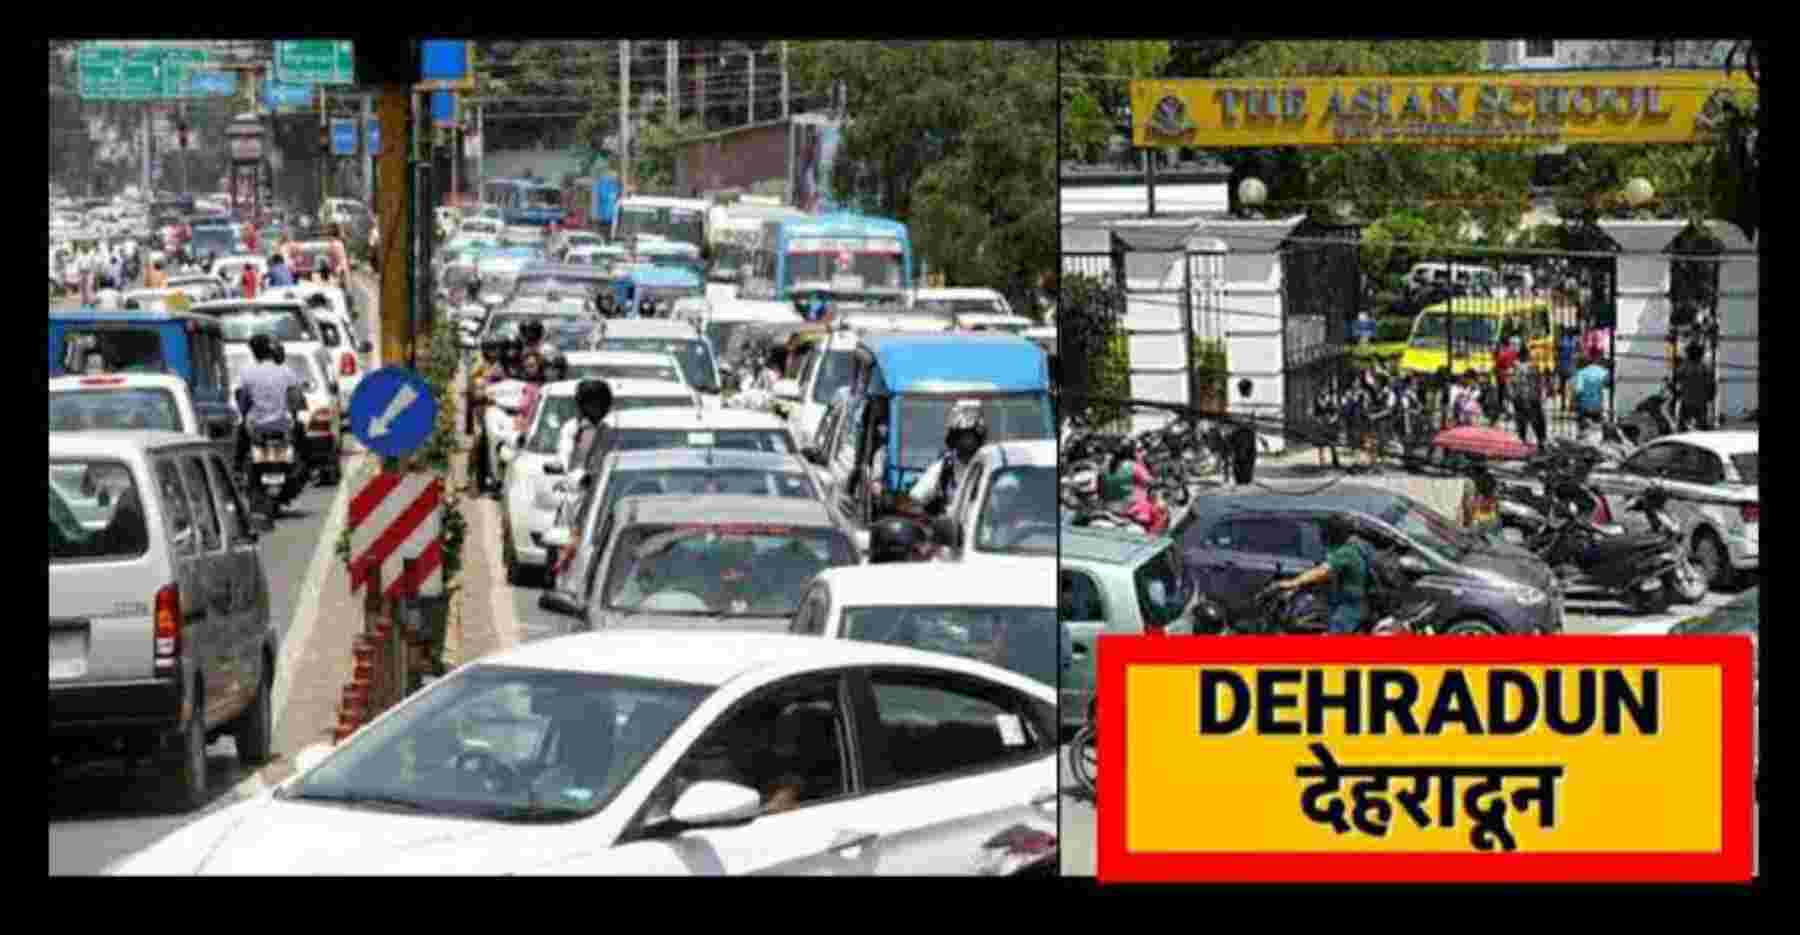 Dehradun news: Route will be diverted on Bakrid, must see before leaving home